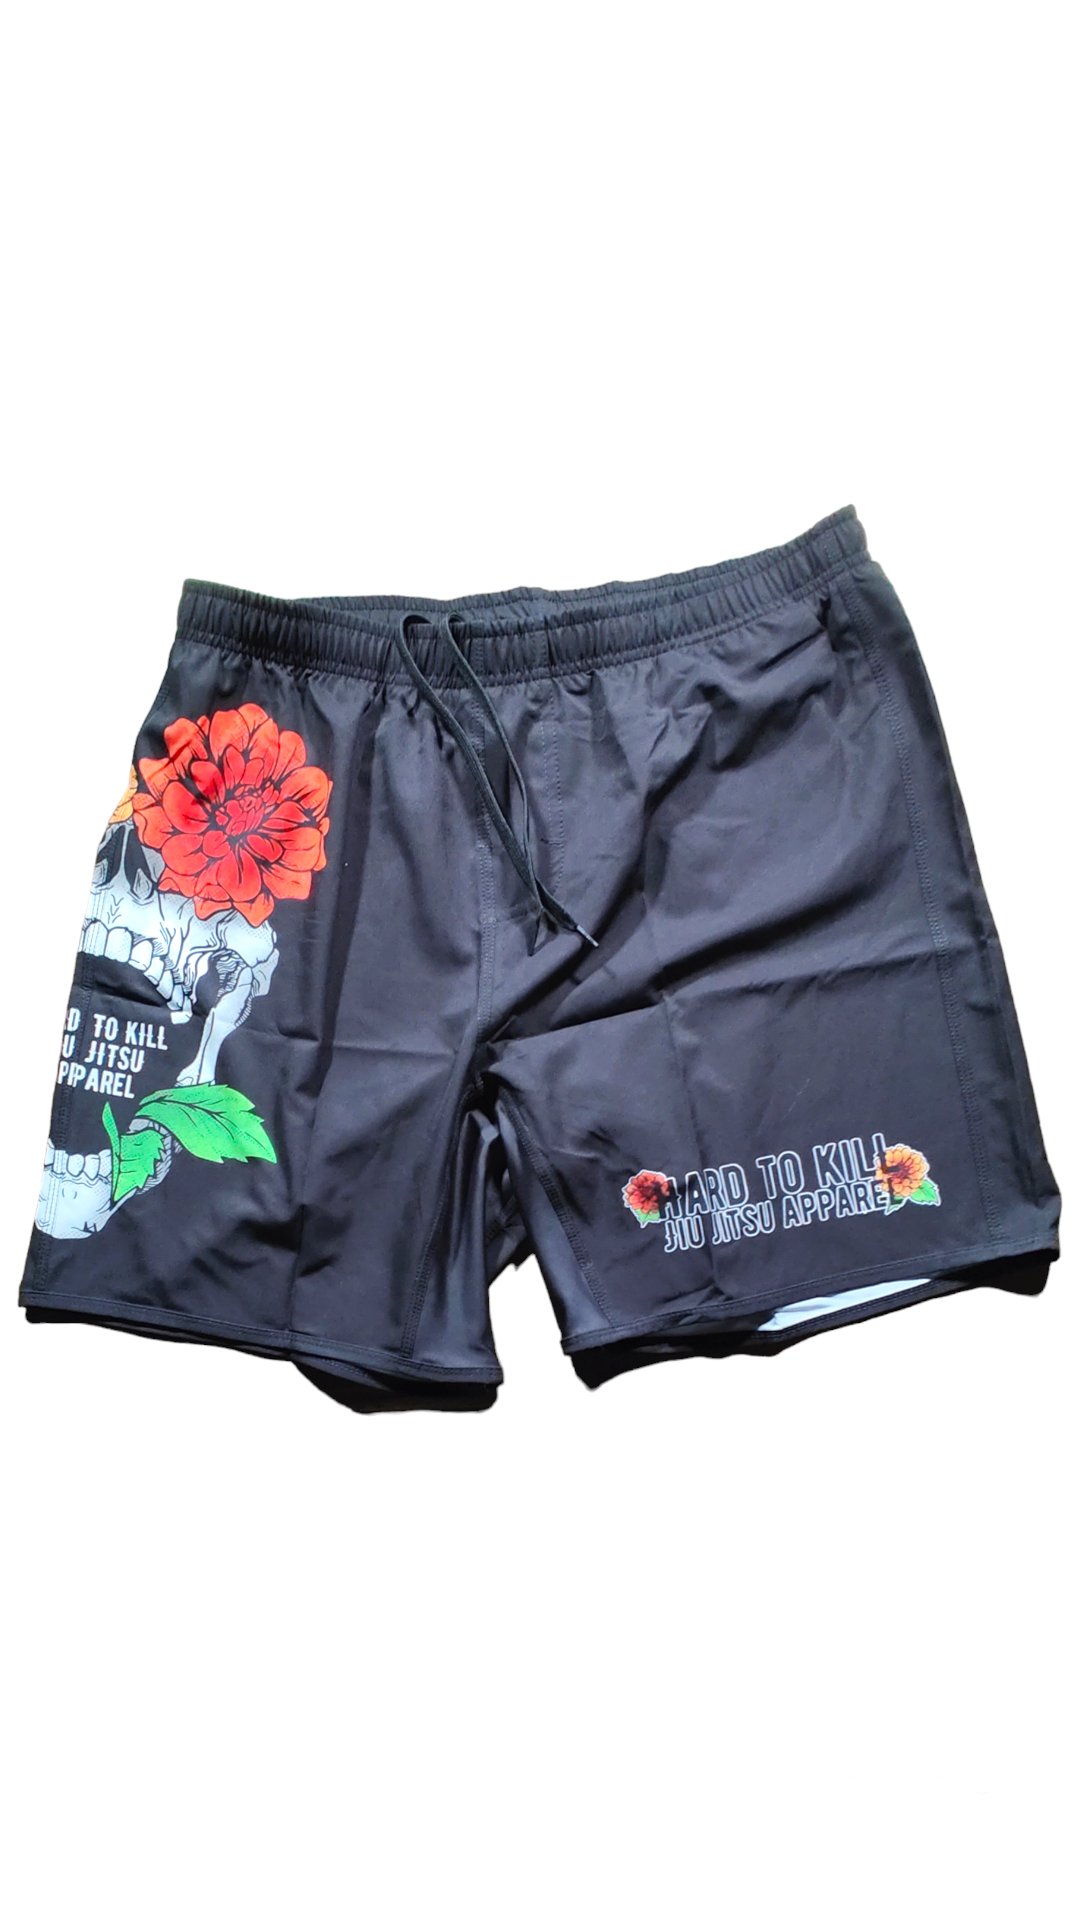 Beauty in Chaos BJJ / MMA shorts -Limited run on size